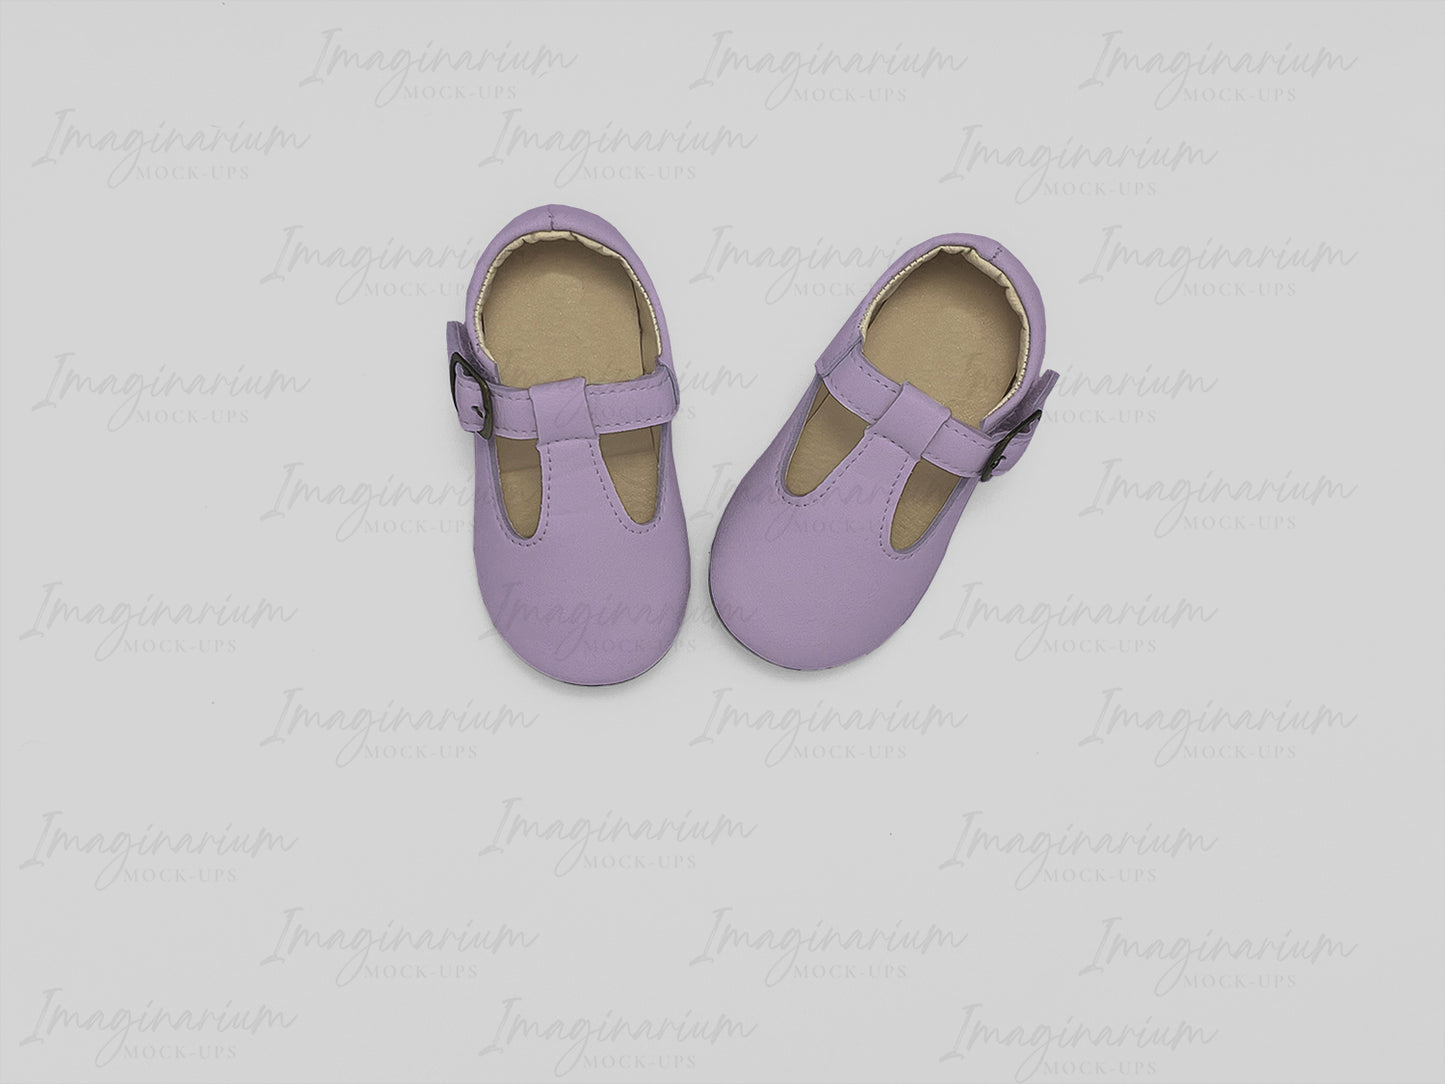 Mary Jane Shoes Mock Up, Realistic Baby Shoes Mockup for Procreate and Photoshop